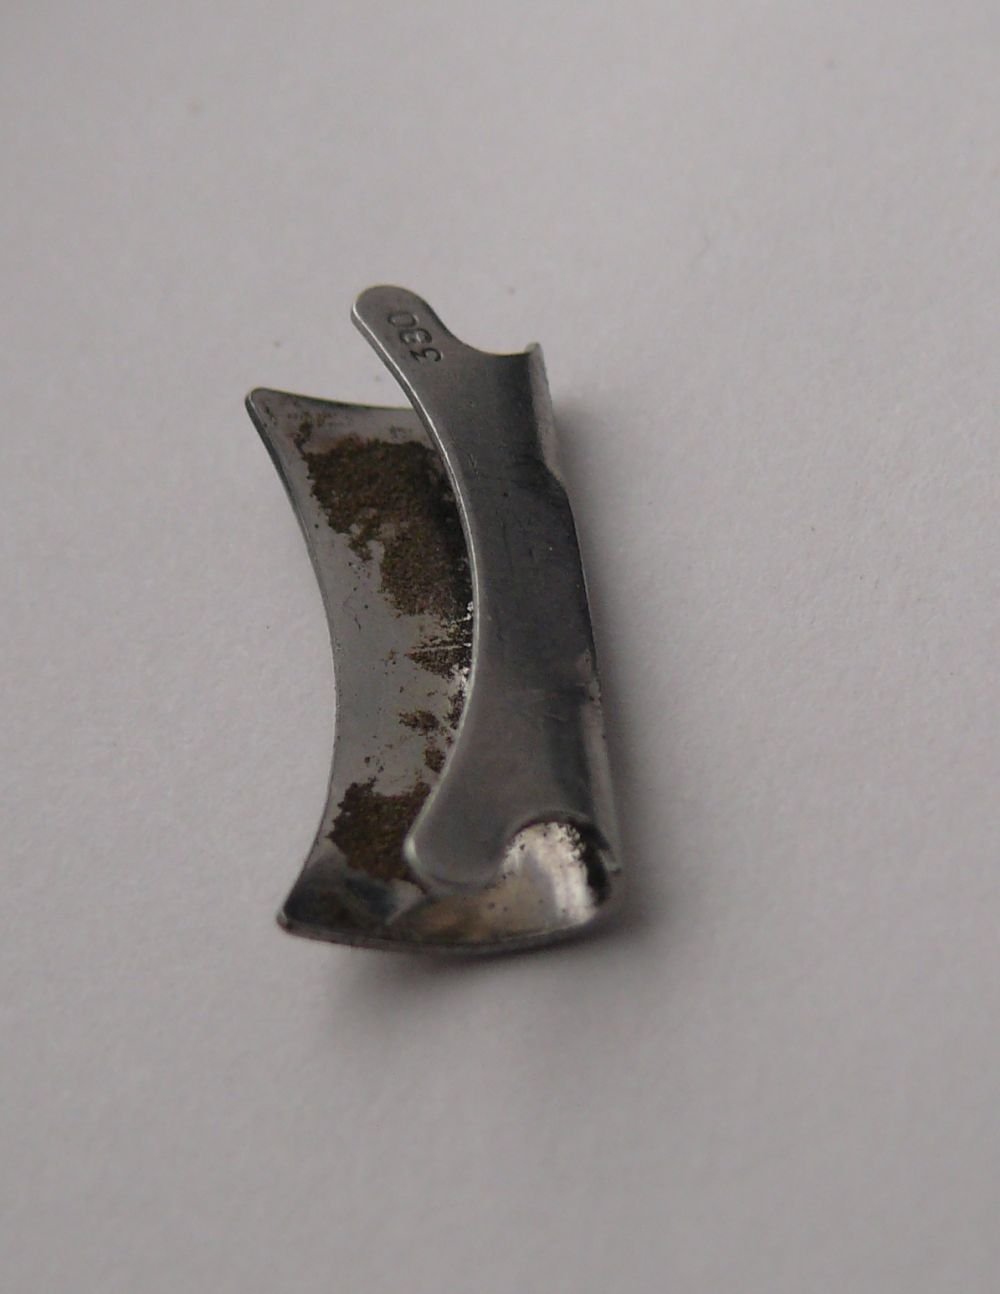 Single Vintage Rolex 20mm 9315 7836 Bracelet End Piece that can be used for various early models - Image 5 of 5